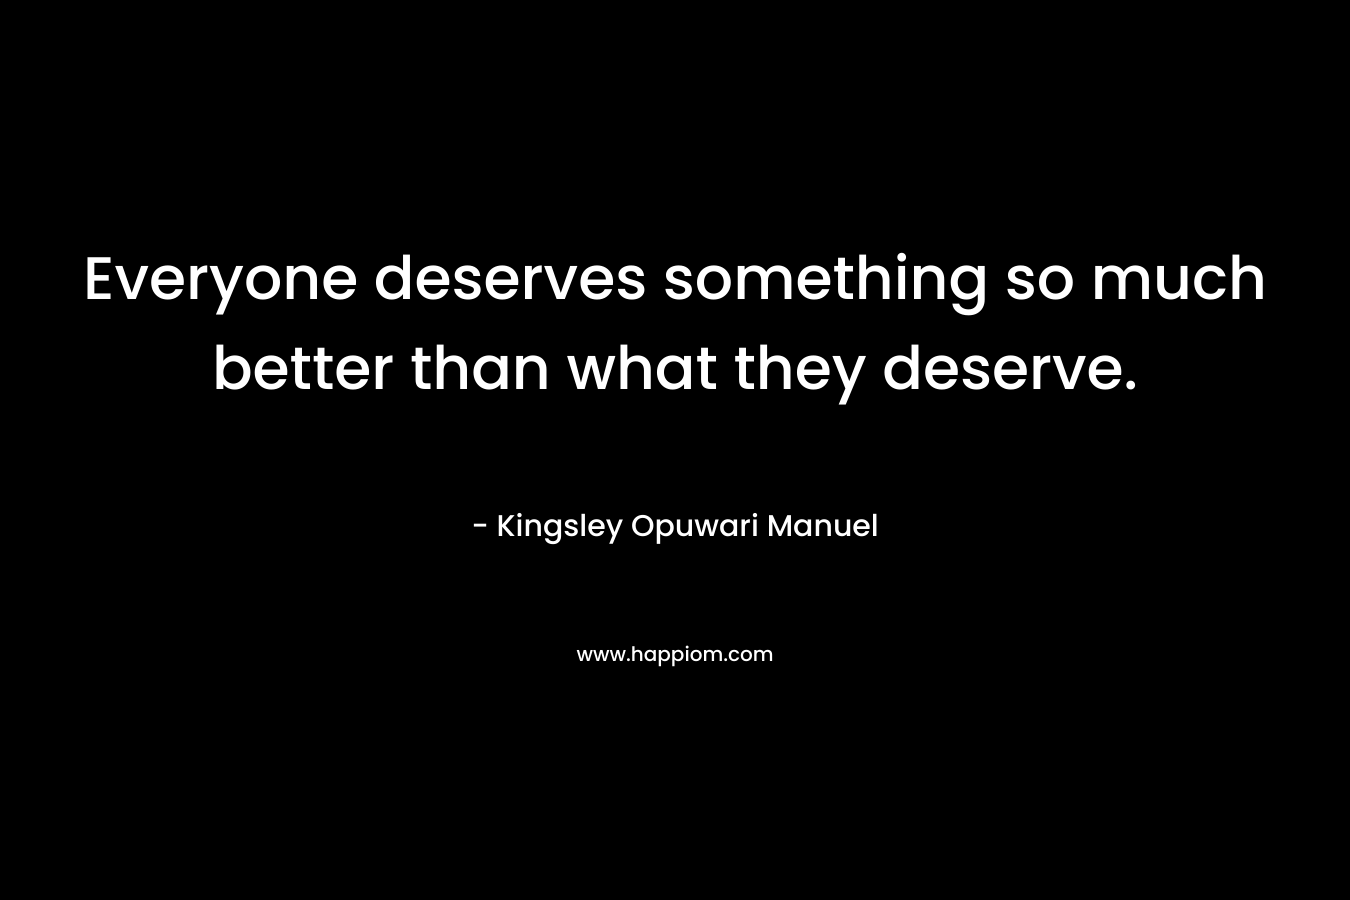 Everyone deserves something so much better than what they deserve. – Kingsley Opuwari Manuel